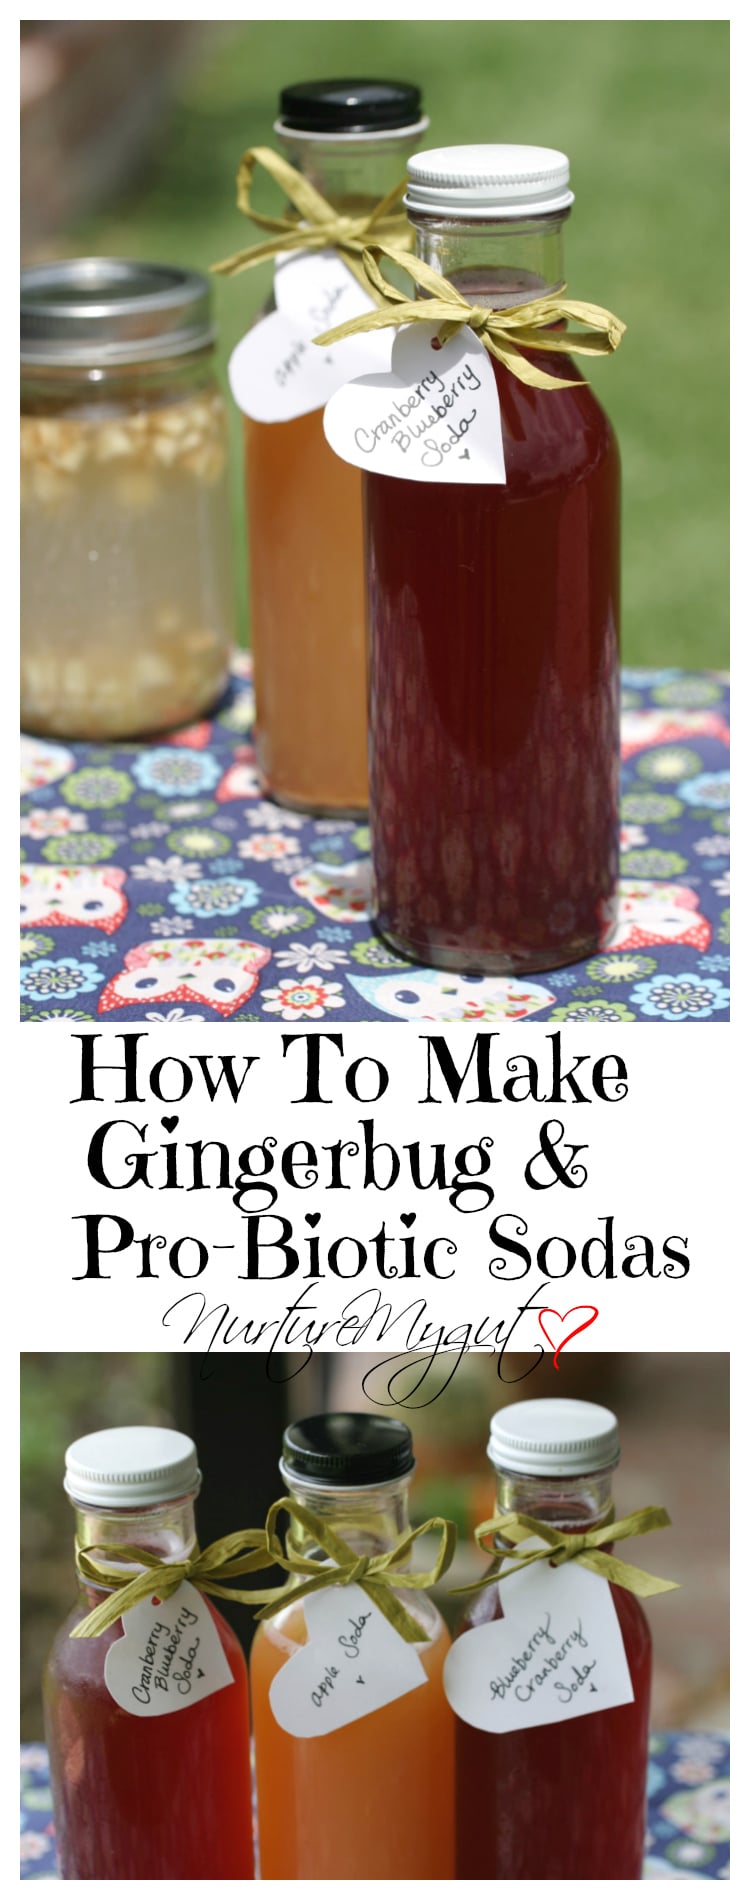 How To Make Gingerbug and Pro-Biotic Sodas